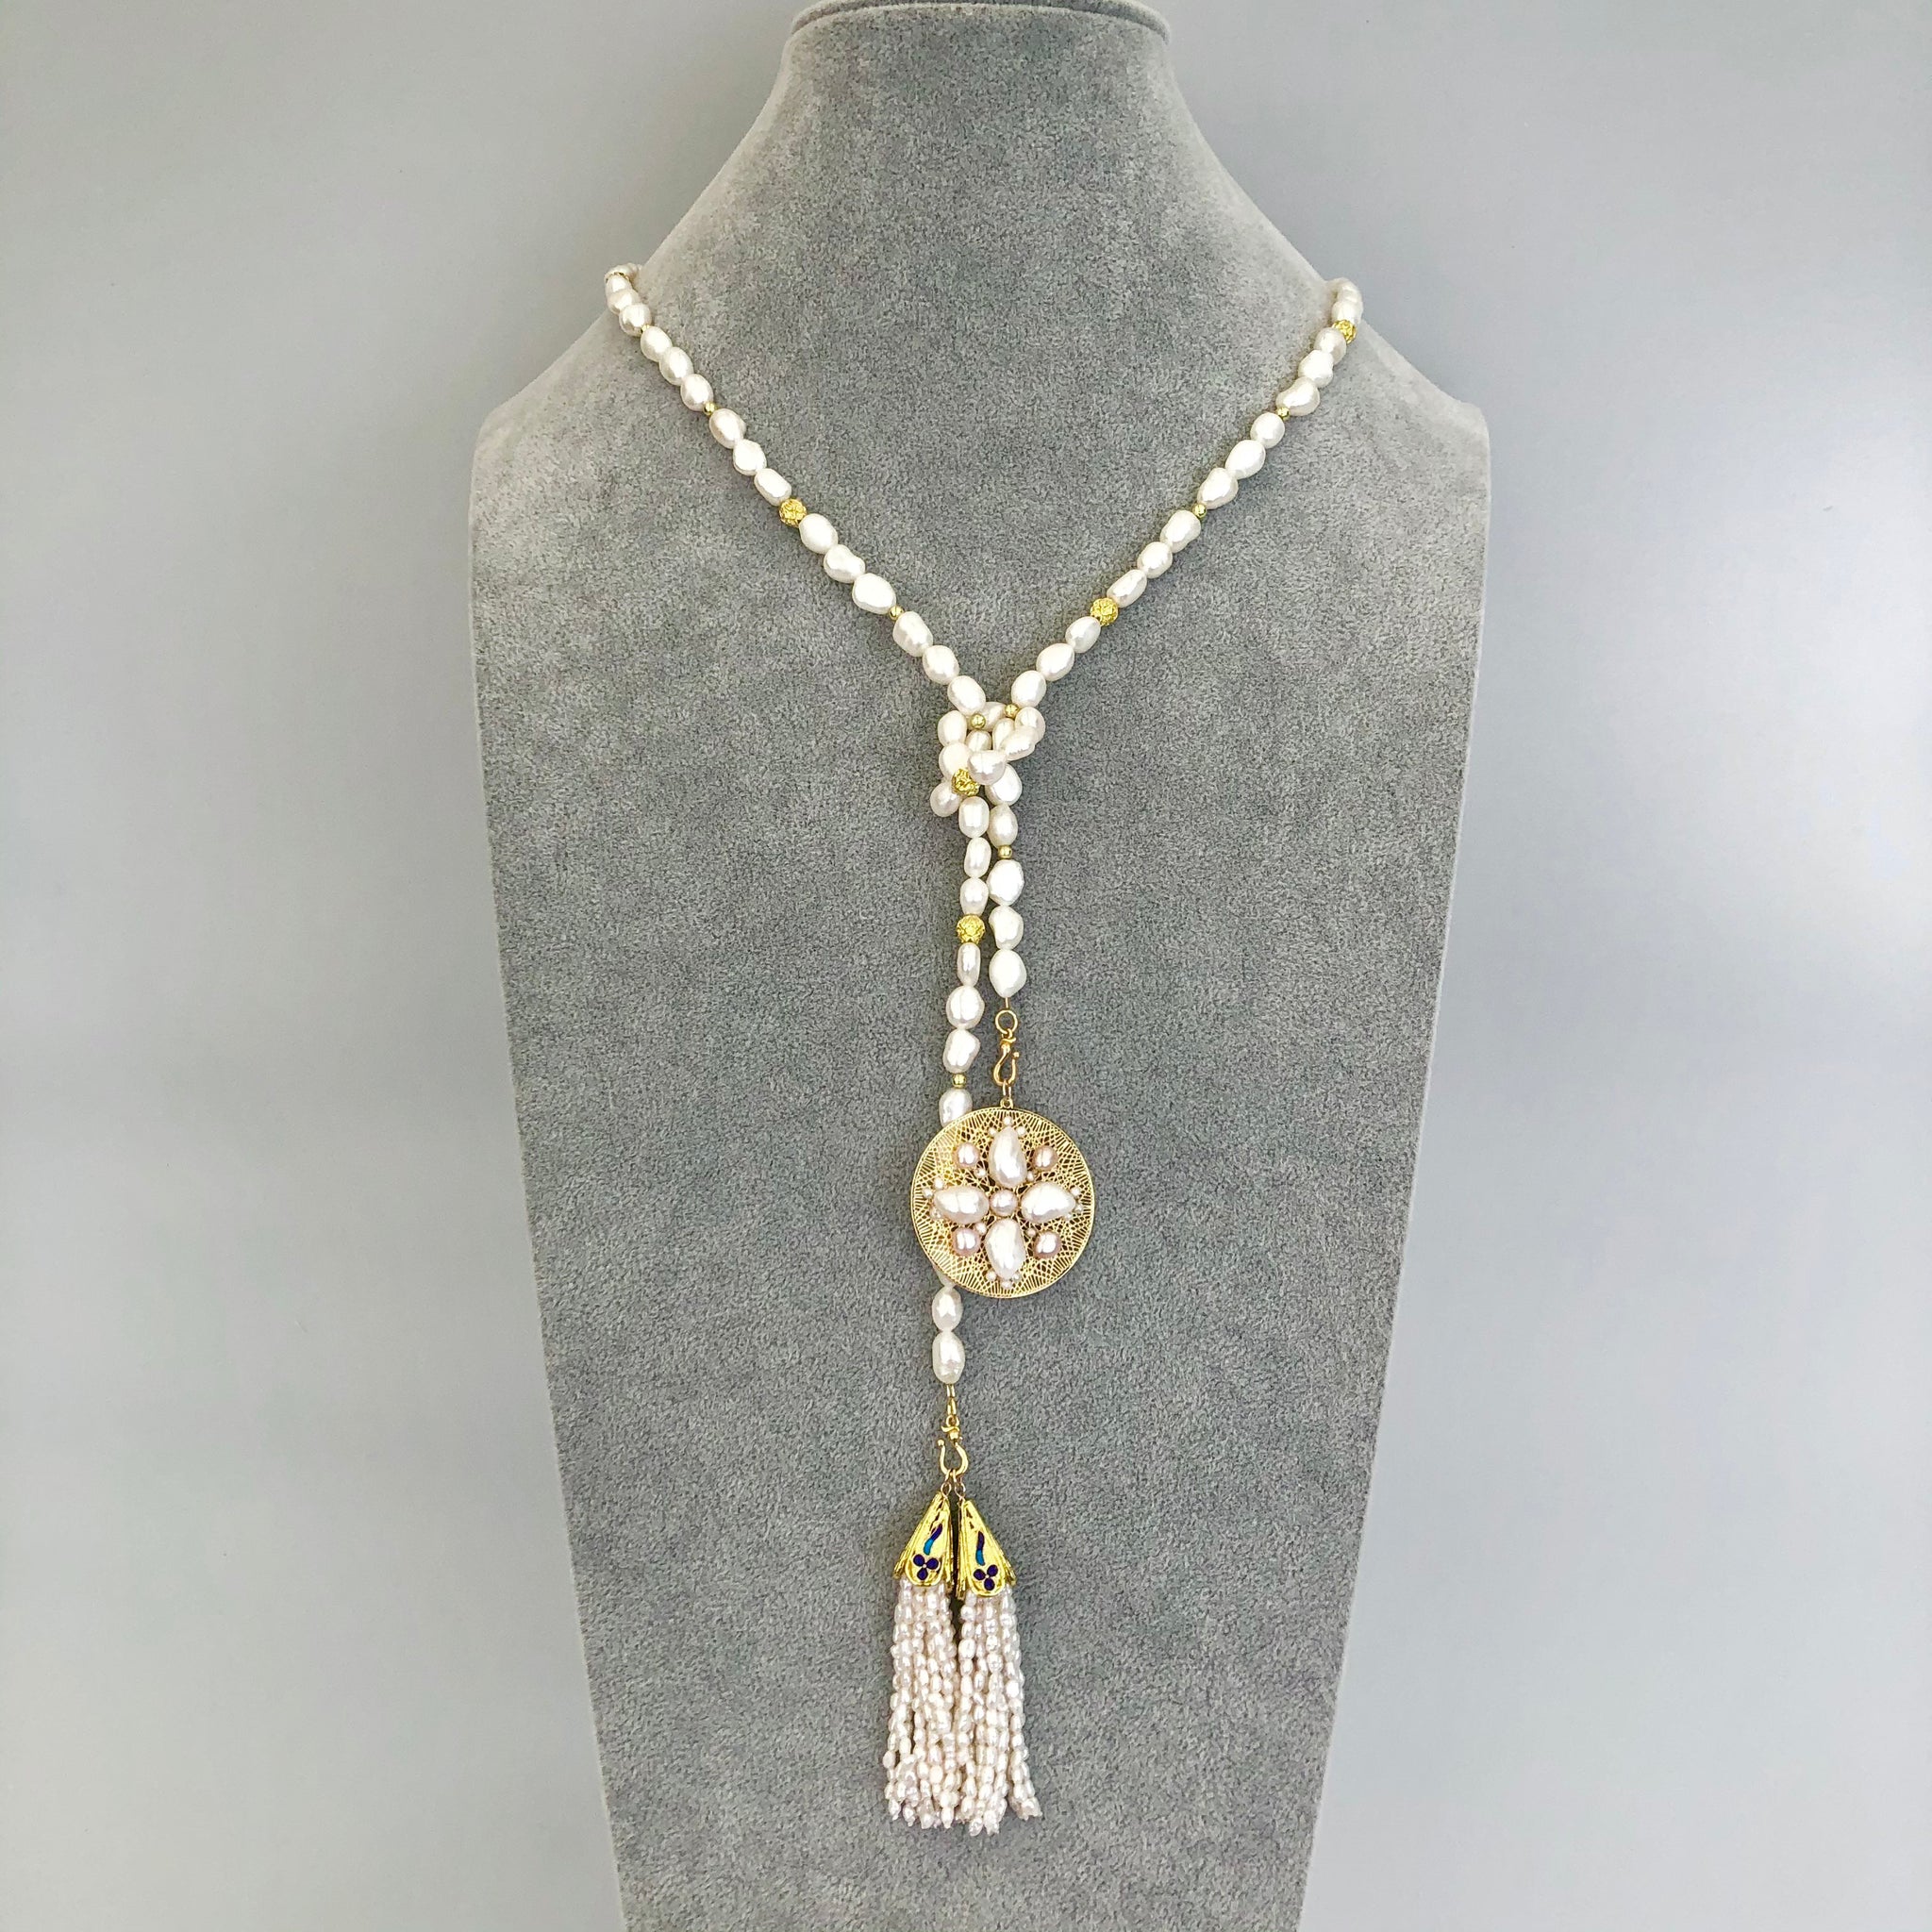 New Lariat Jewelry | | Multi-style Yun Pearl Boutique Asian York Necklace Set from Boutique Baroque